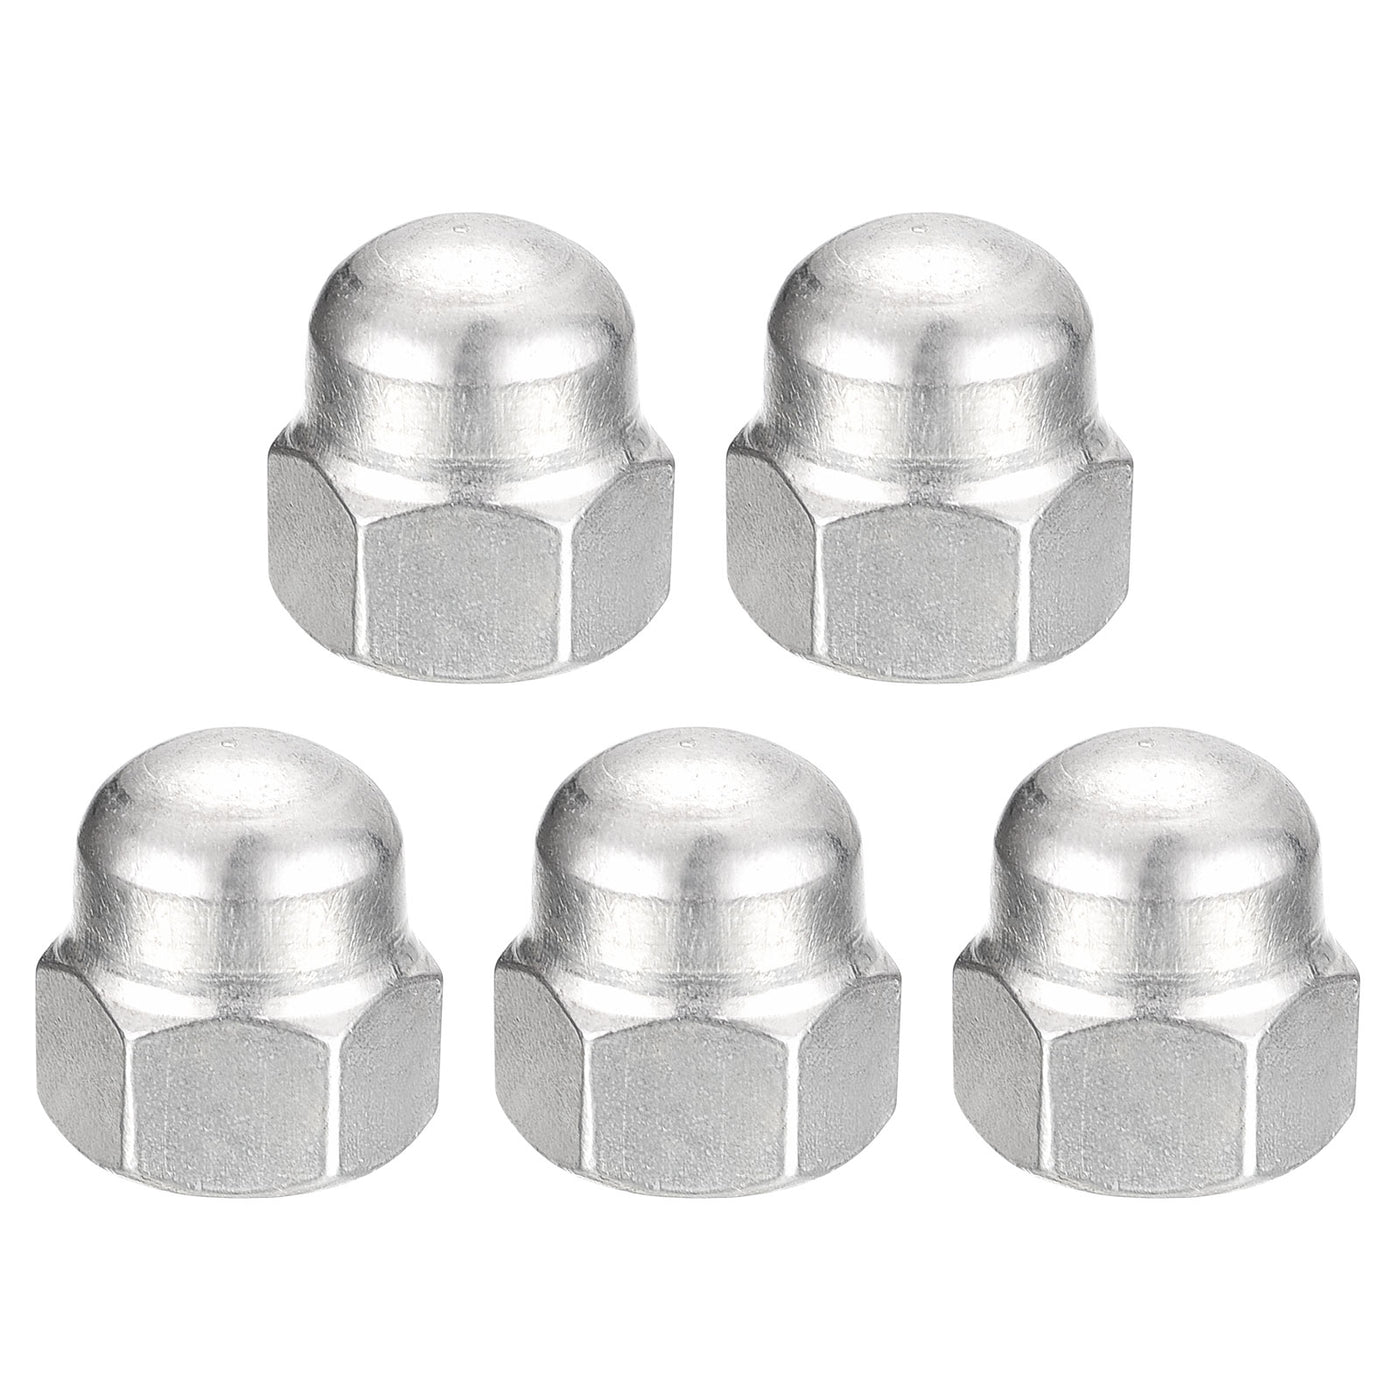 uxcell Uxcell 7/16-14 Acorn Cap Nuts,5pcs - 304 Stainless Steel Hardware Nuts, Acorn Hex Cap Dome Head Nuts for Fasteners (Silver)